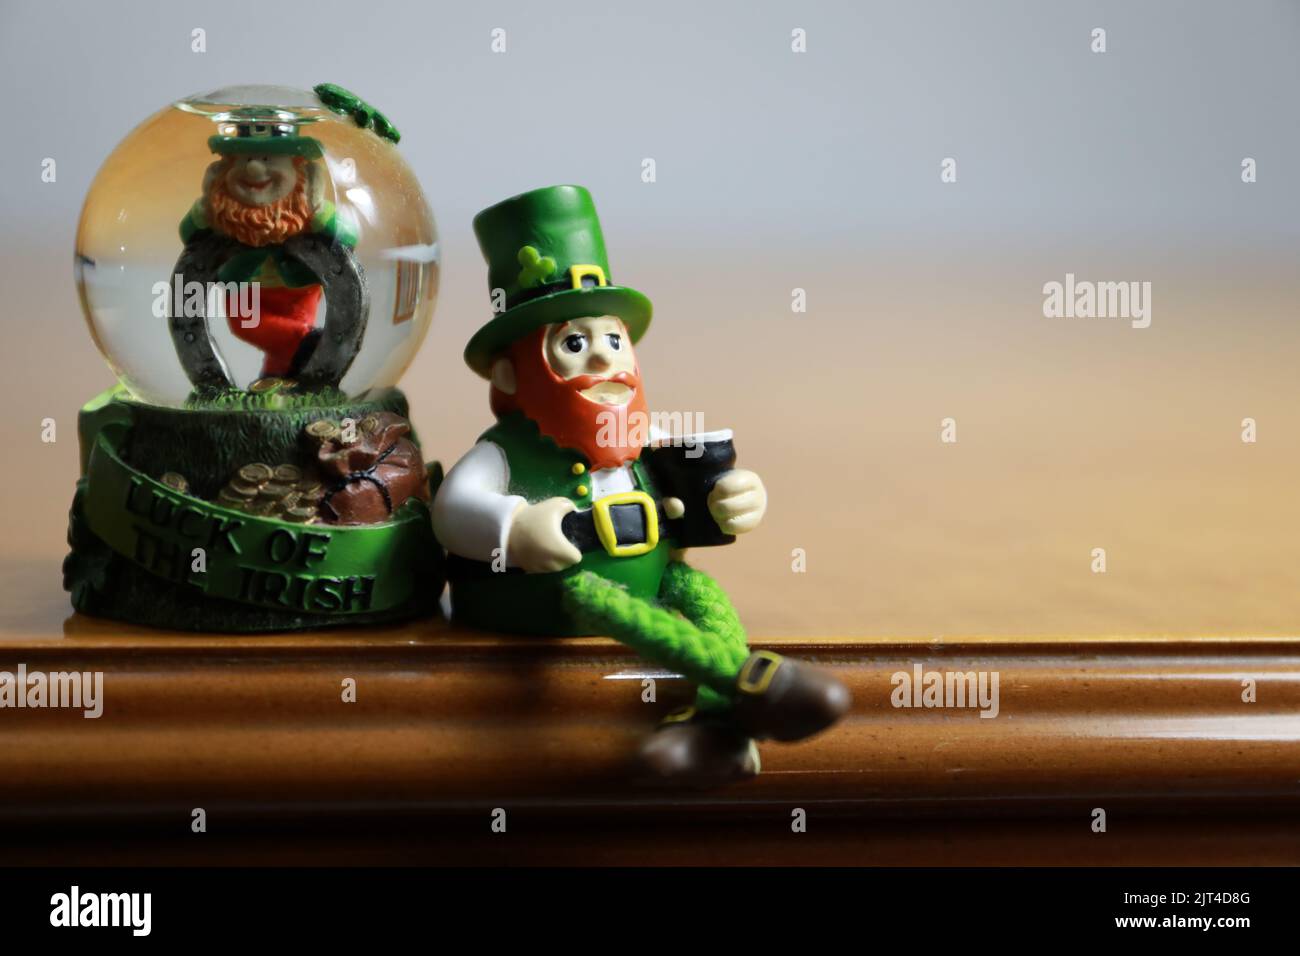 A closeup of leprechaun figurines isolated on the wooden furniture Stock Photo